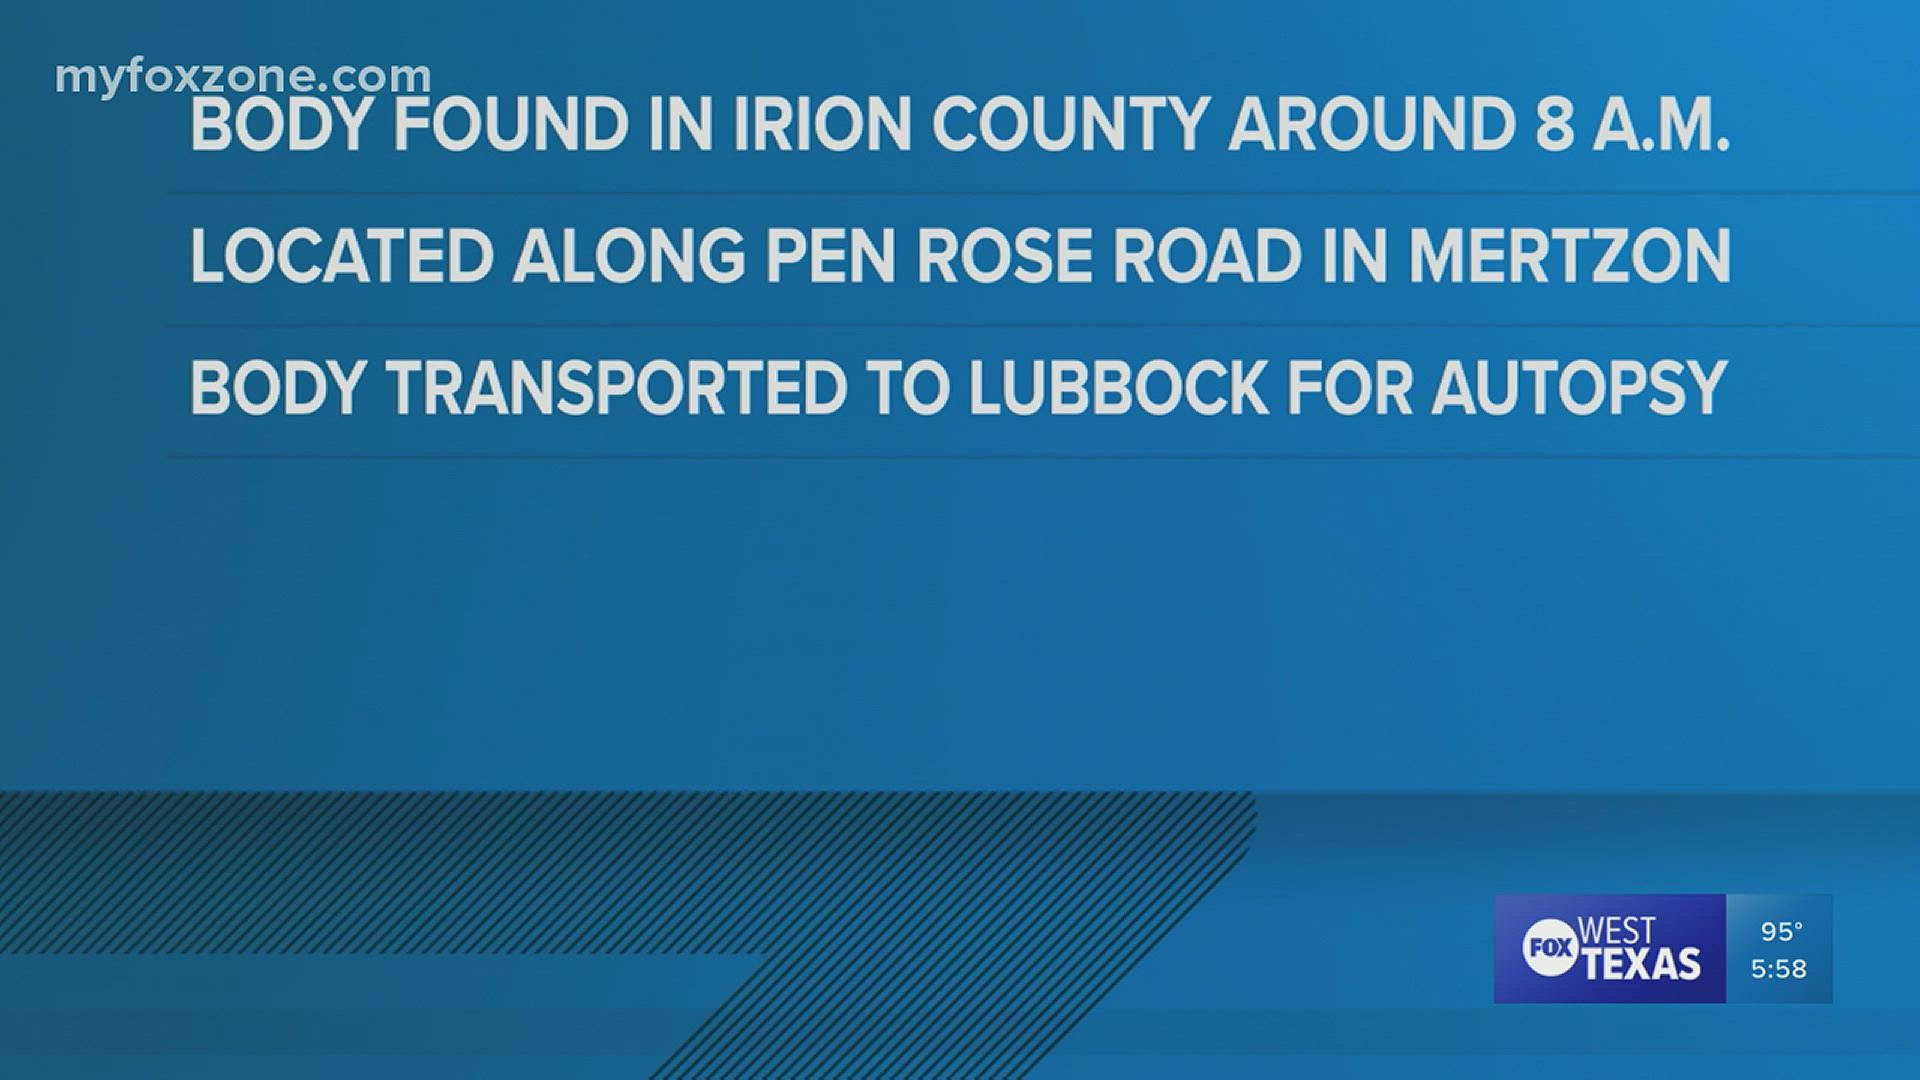 The remains have been sent to Lubbock for positive identification and to determine a cause of death.